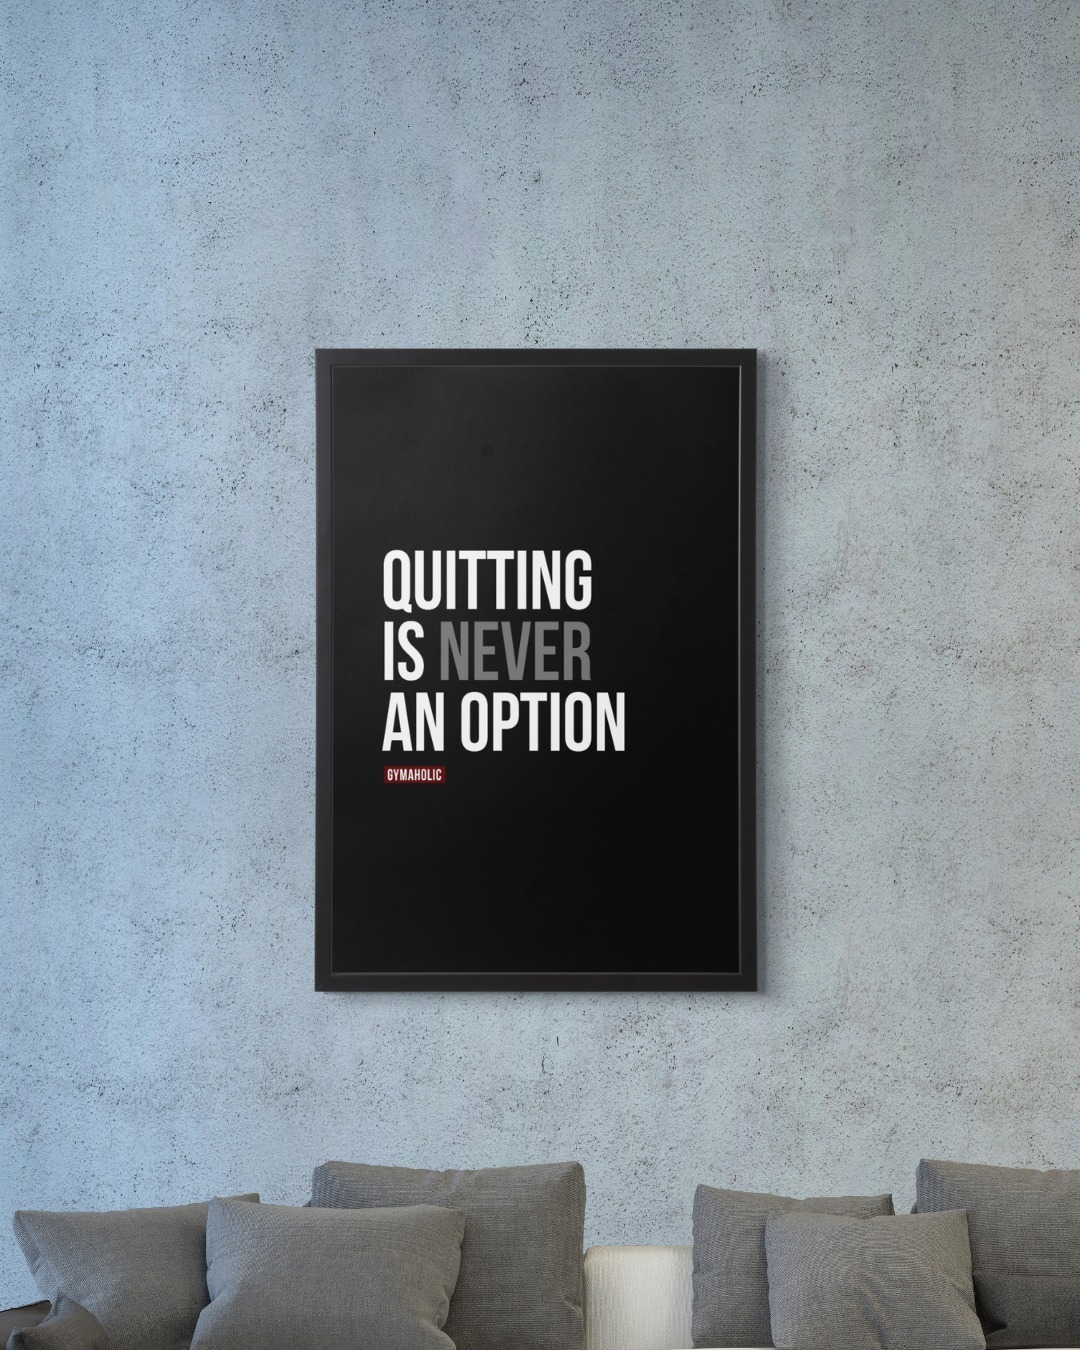 Quitting is never an option. 💪